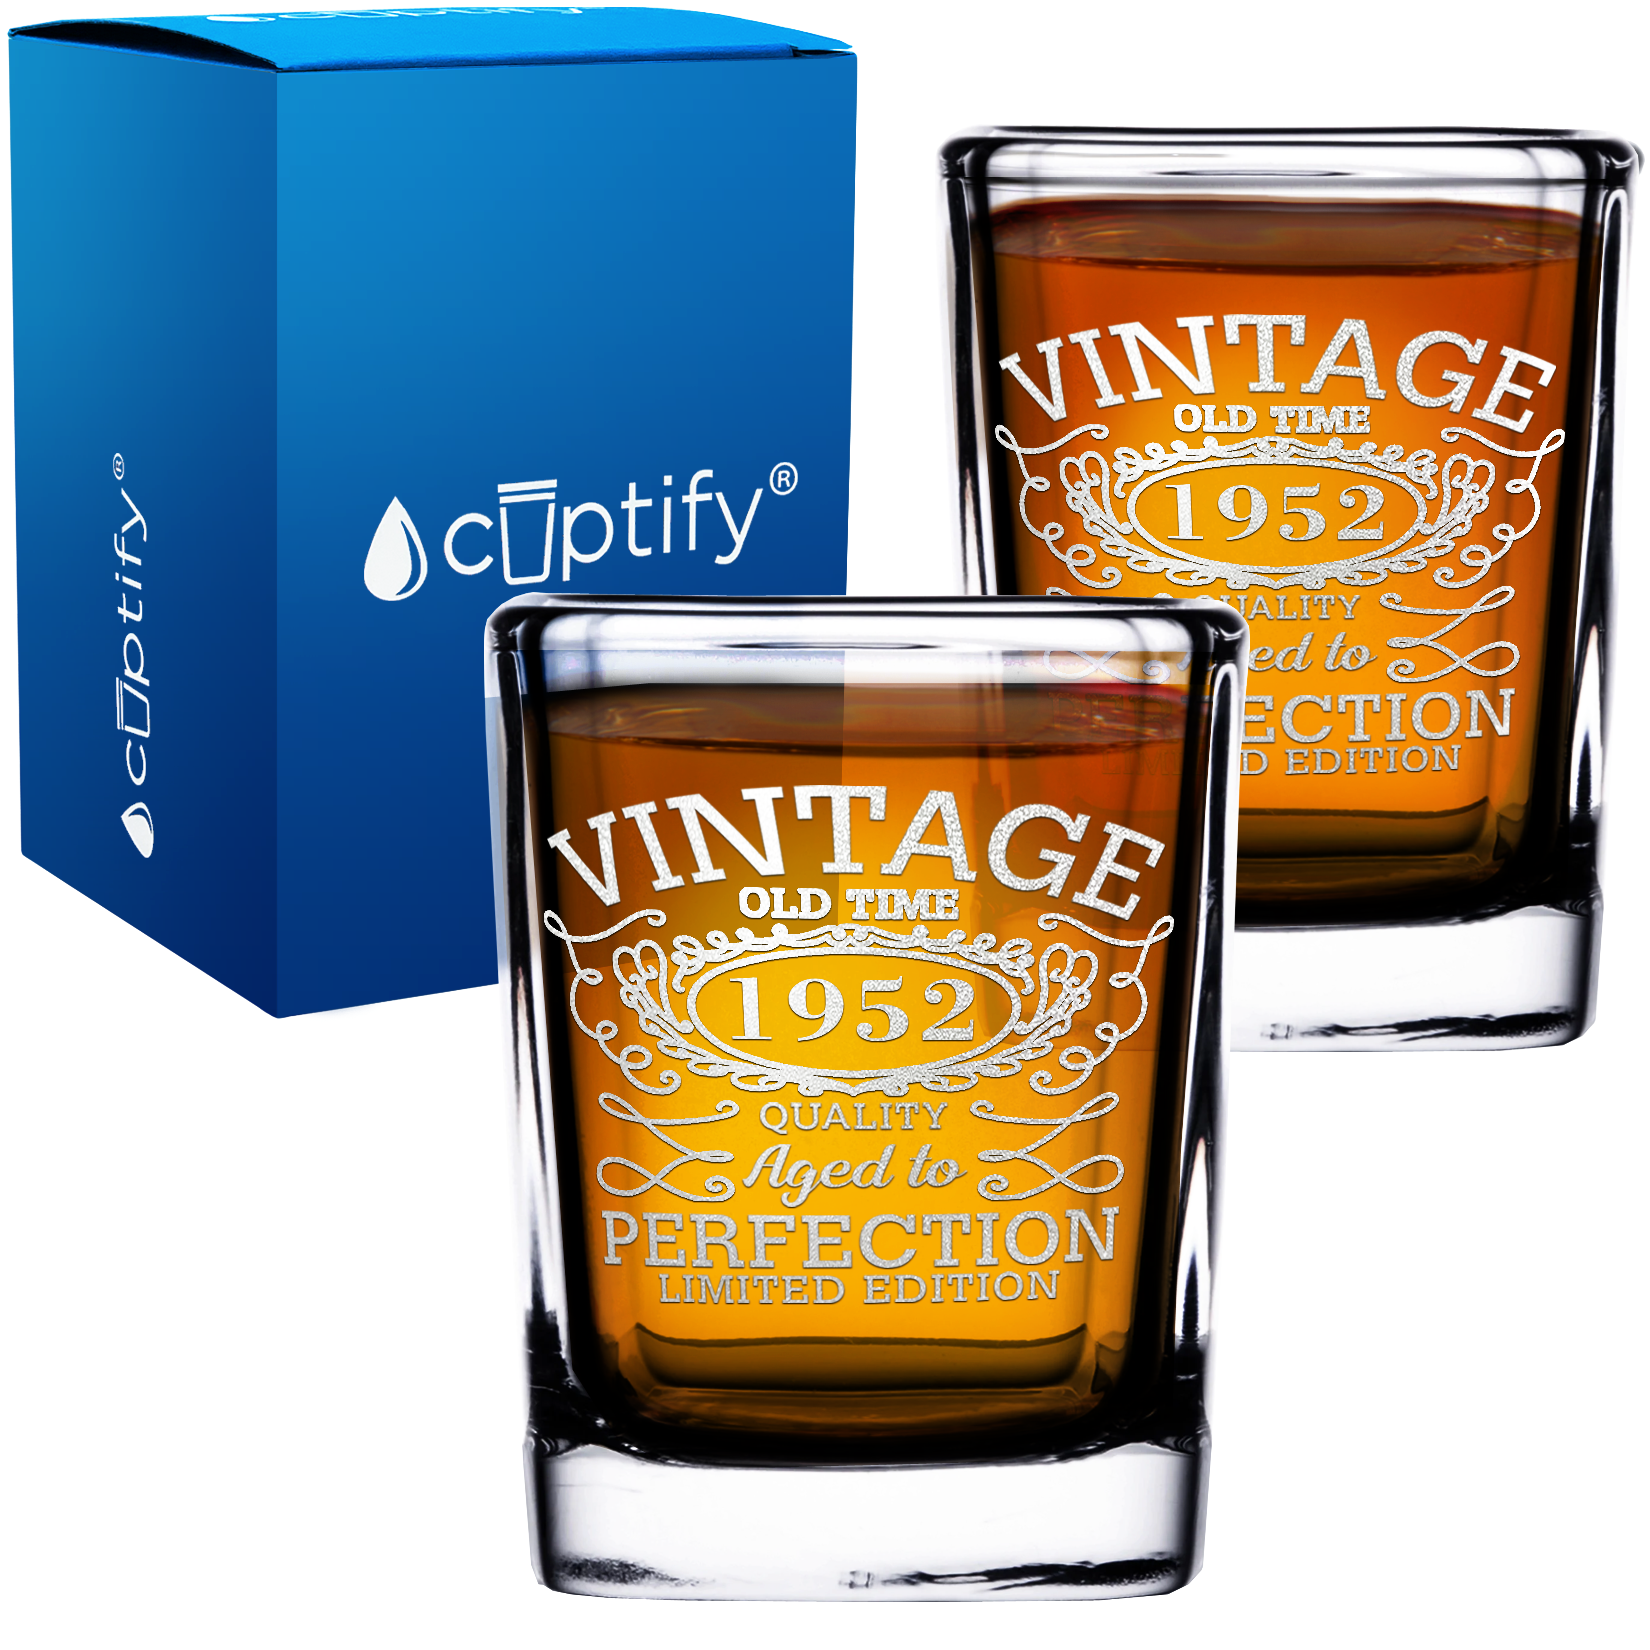 70th Birthday Vintage 70 Years Old Time 1952 Quality 2oz Square Shot Glasses - Set of 2